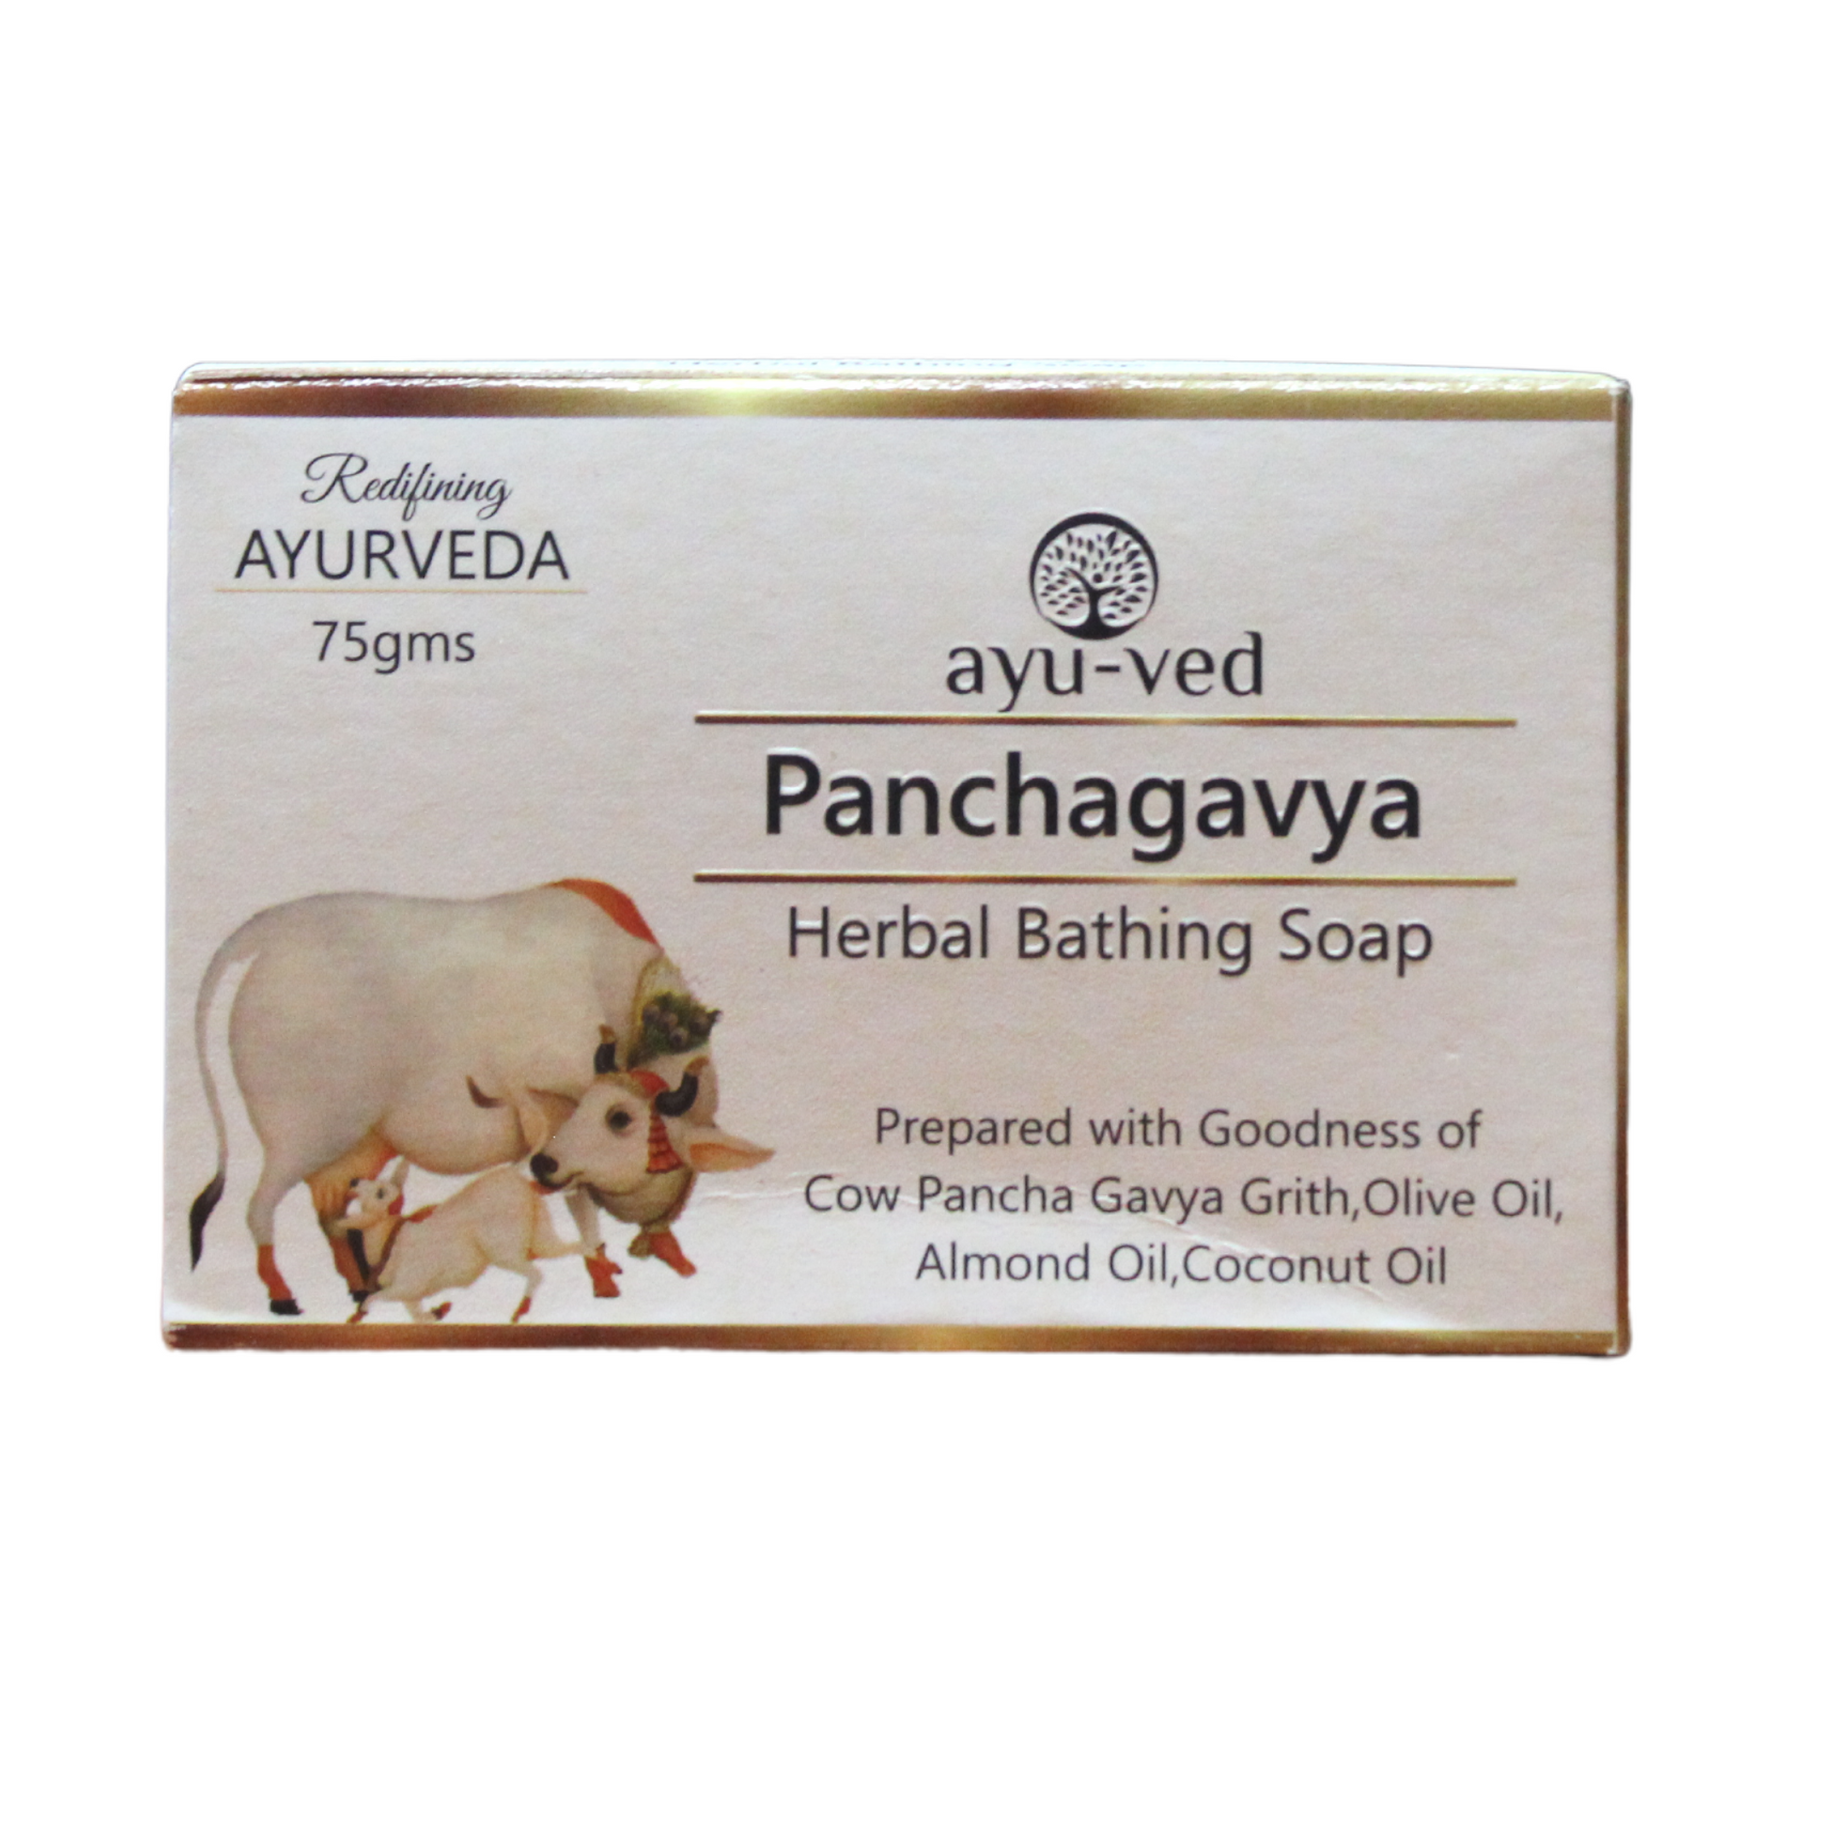 Shop Panchagavya Herbal Bathing Soap 75gm at price 60.00 from Ayuved Online - Ayush Care